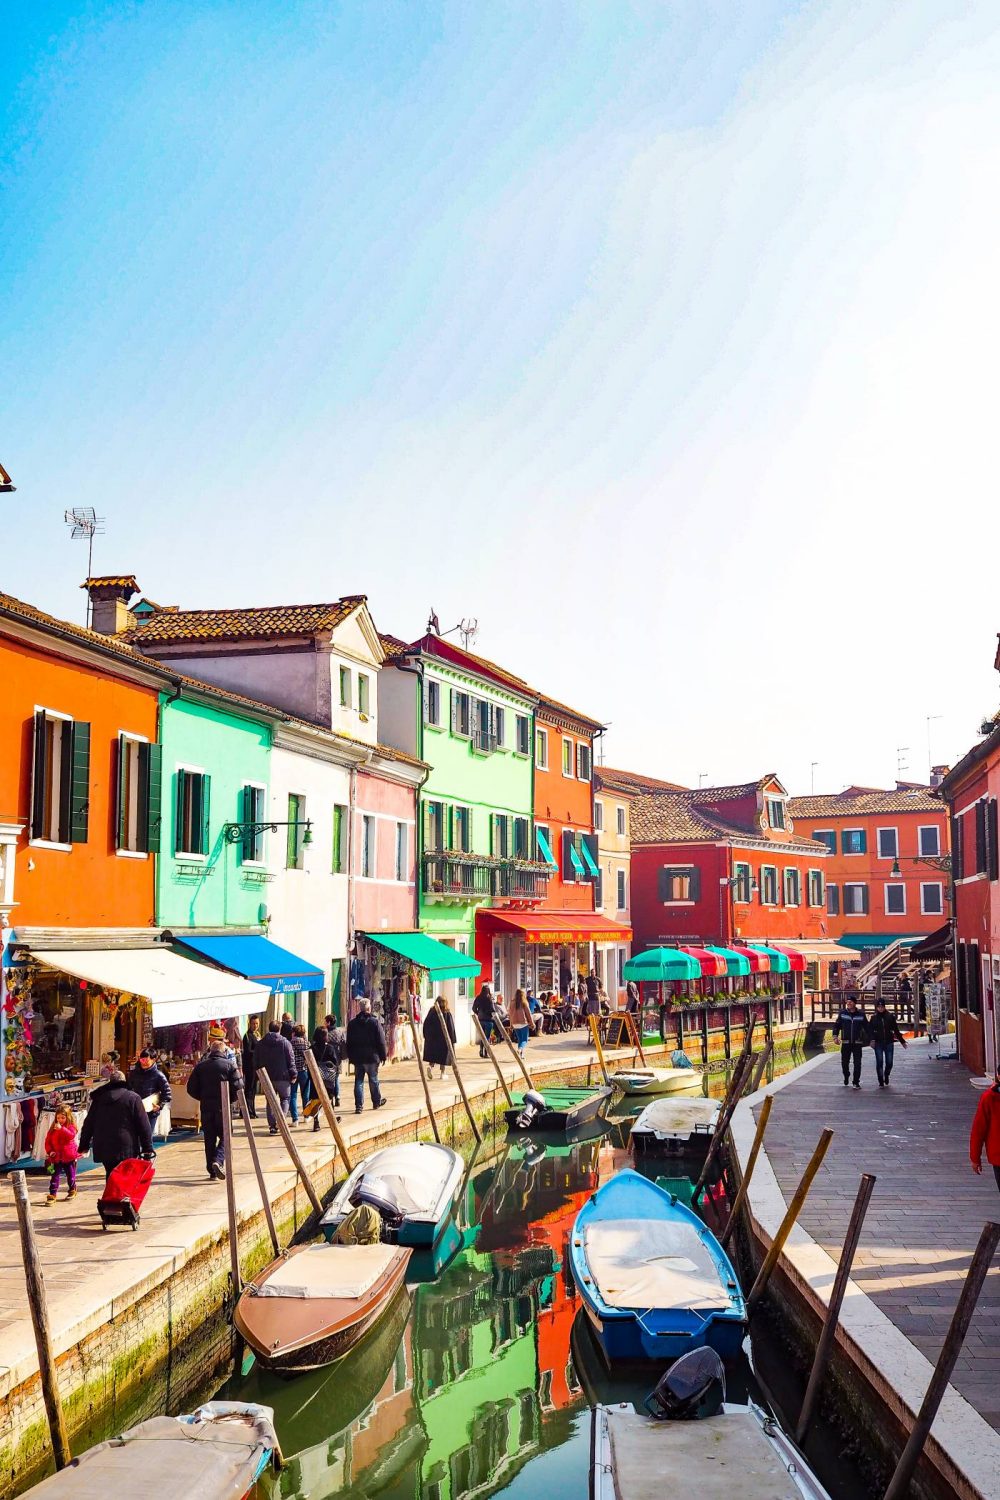 Canals and Rainbow houses in Burano, Venice